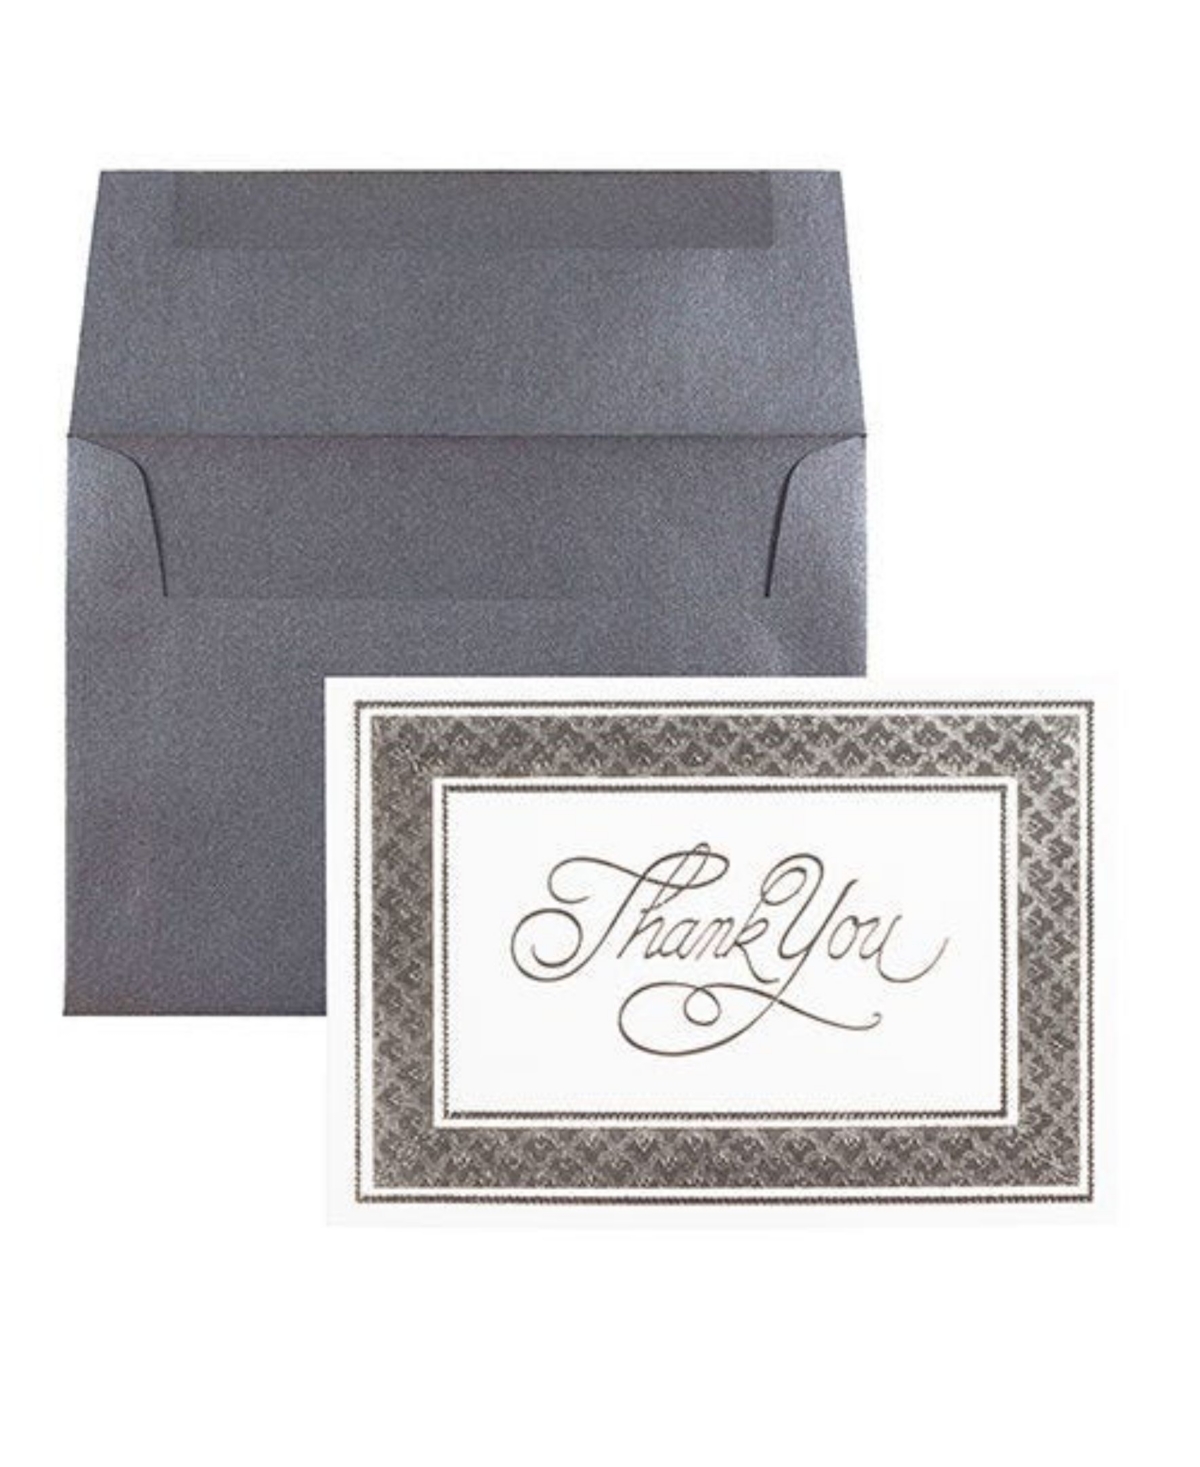 Thank You Card Sets - 25 Cards and Envelopes - Silver Border Cards with Anthracite Enve